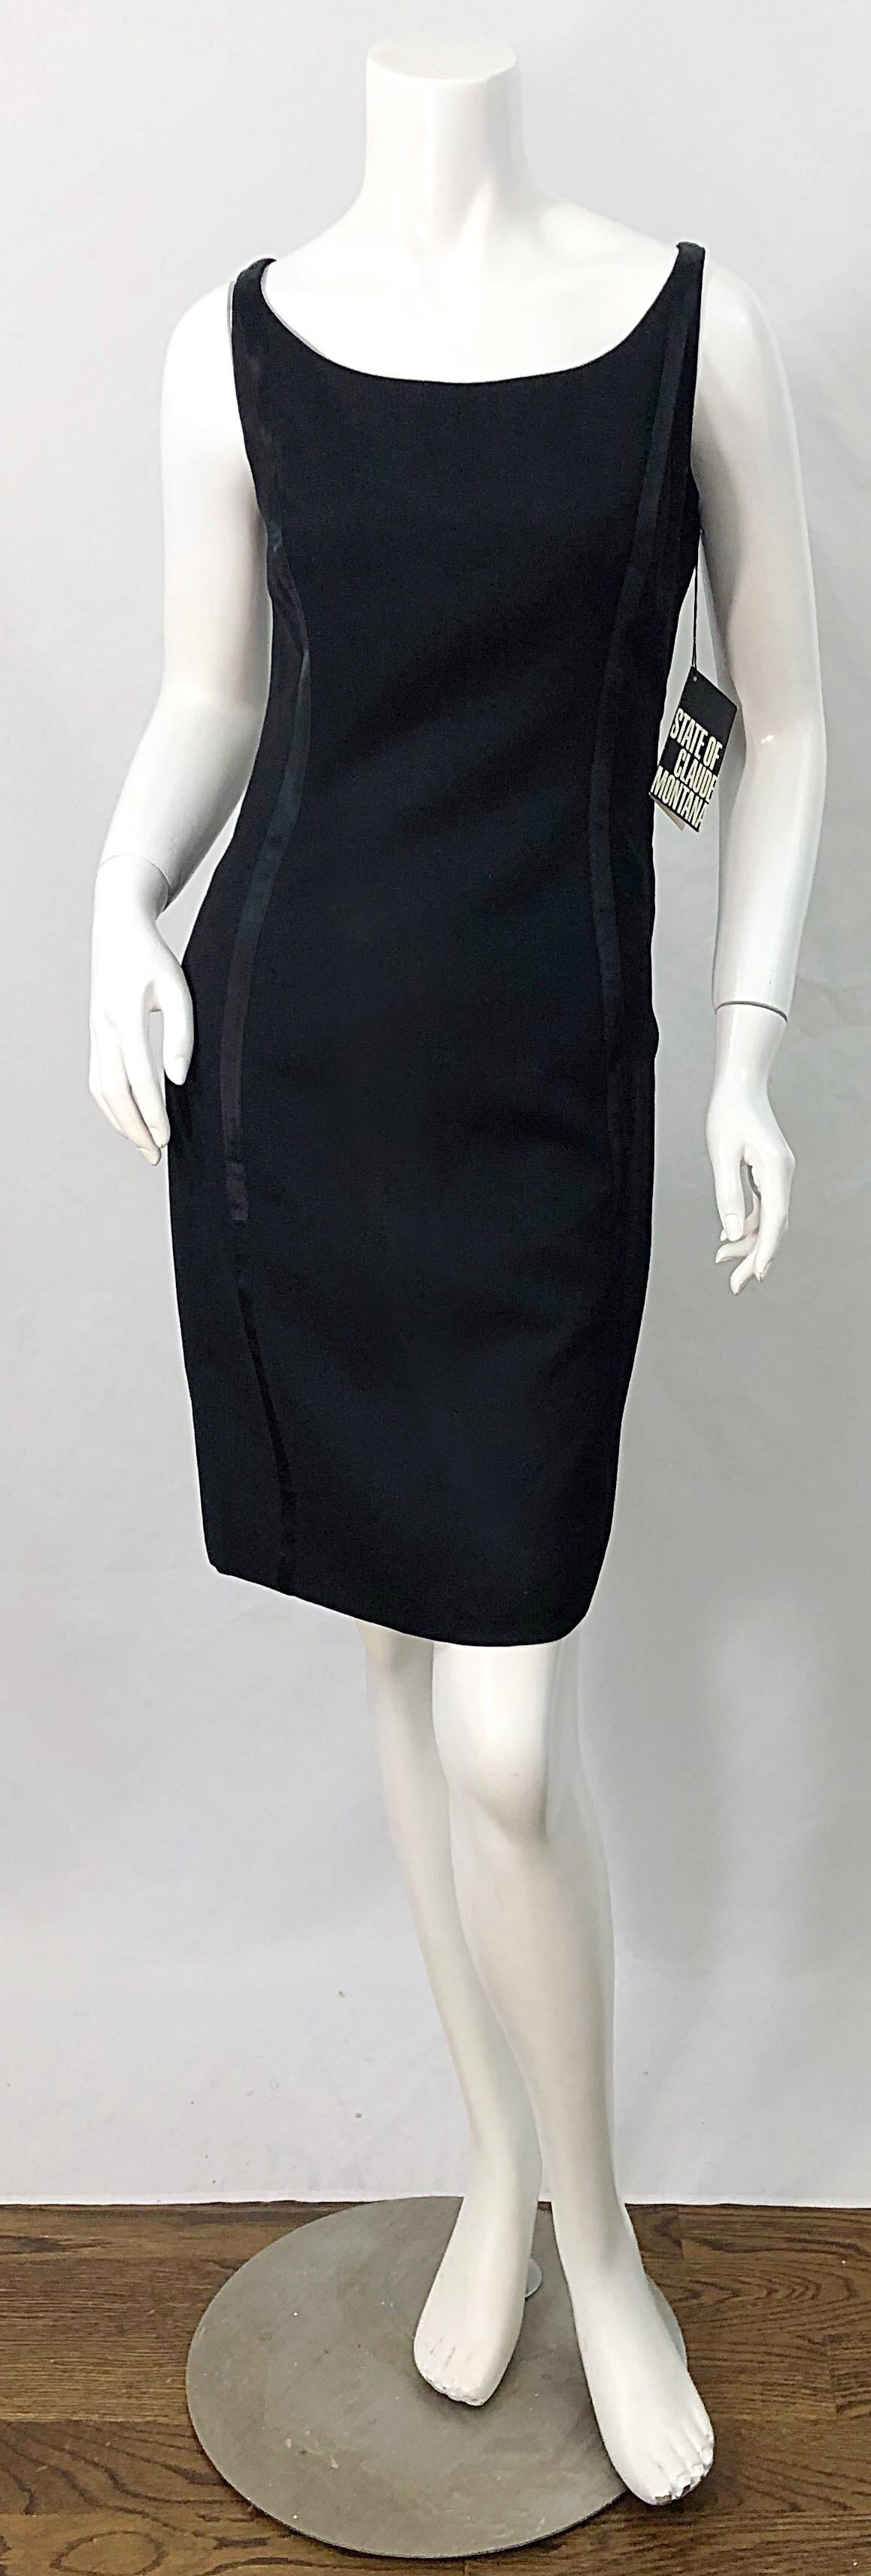 New with original tags deadstock 1990s CLAUDE MONTANA little black dress ! Features a soft lightweight wool, with satin tuxedo stripes up the front and back sides. Fully lined. Hidden zipper up the back with hook-and-eye closure.
The perfect little